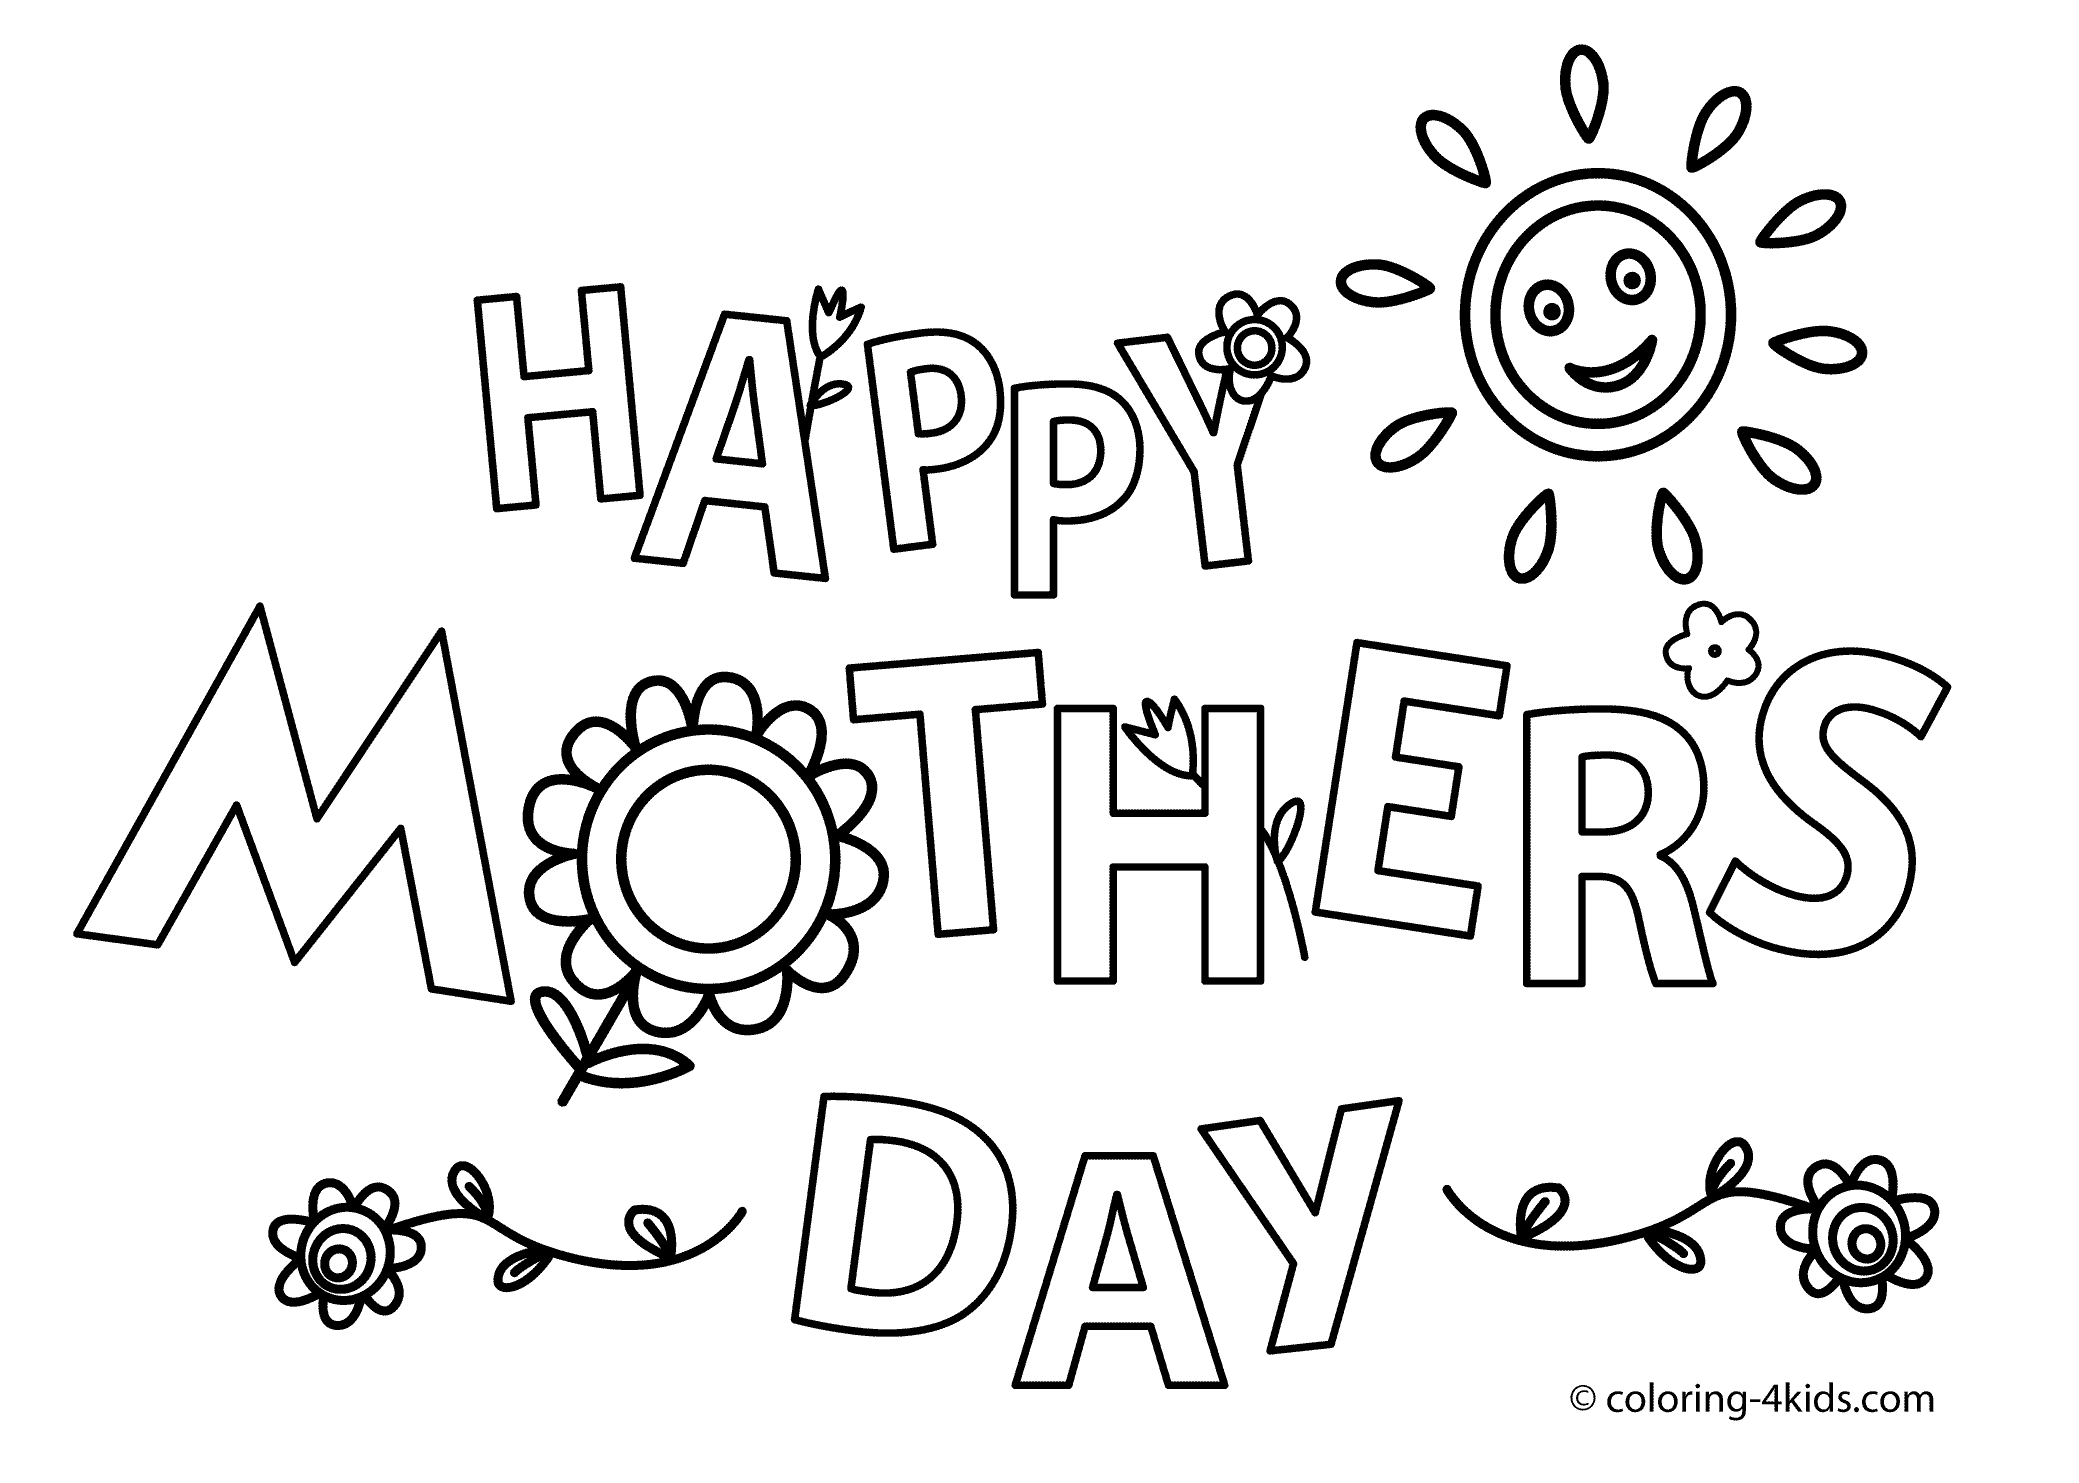 mothers day coloring pages for preschool free printable mothers day coloring pages for kids mothers coloring pages day preschool for 